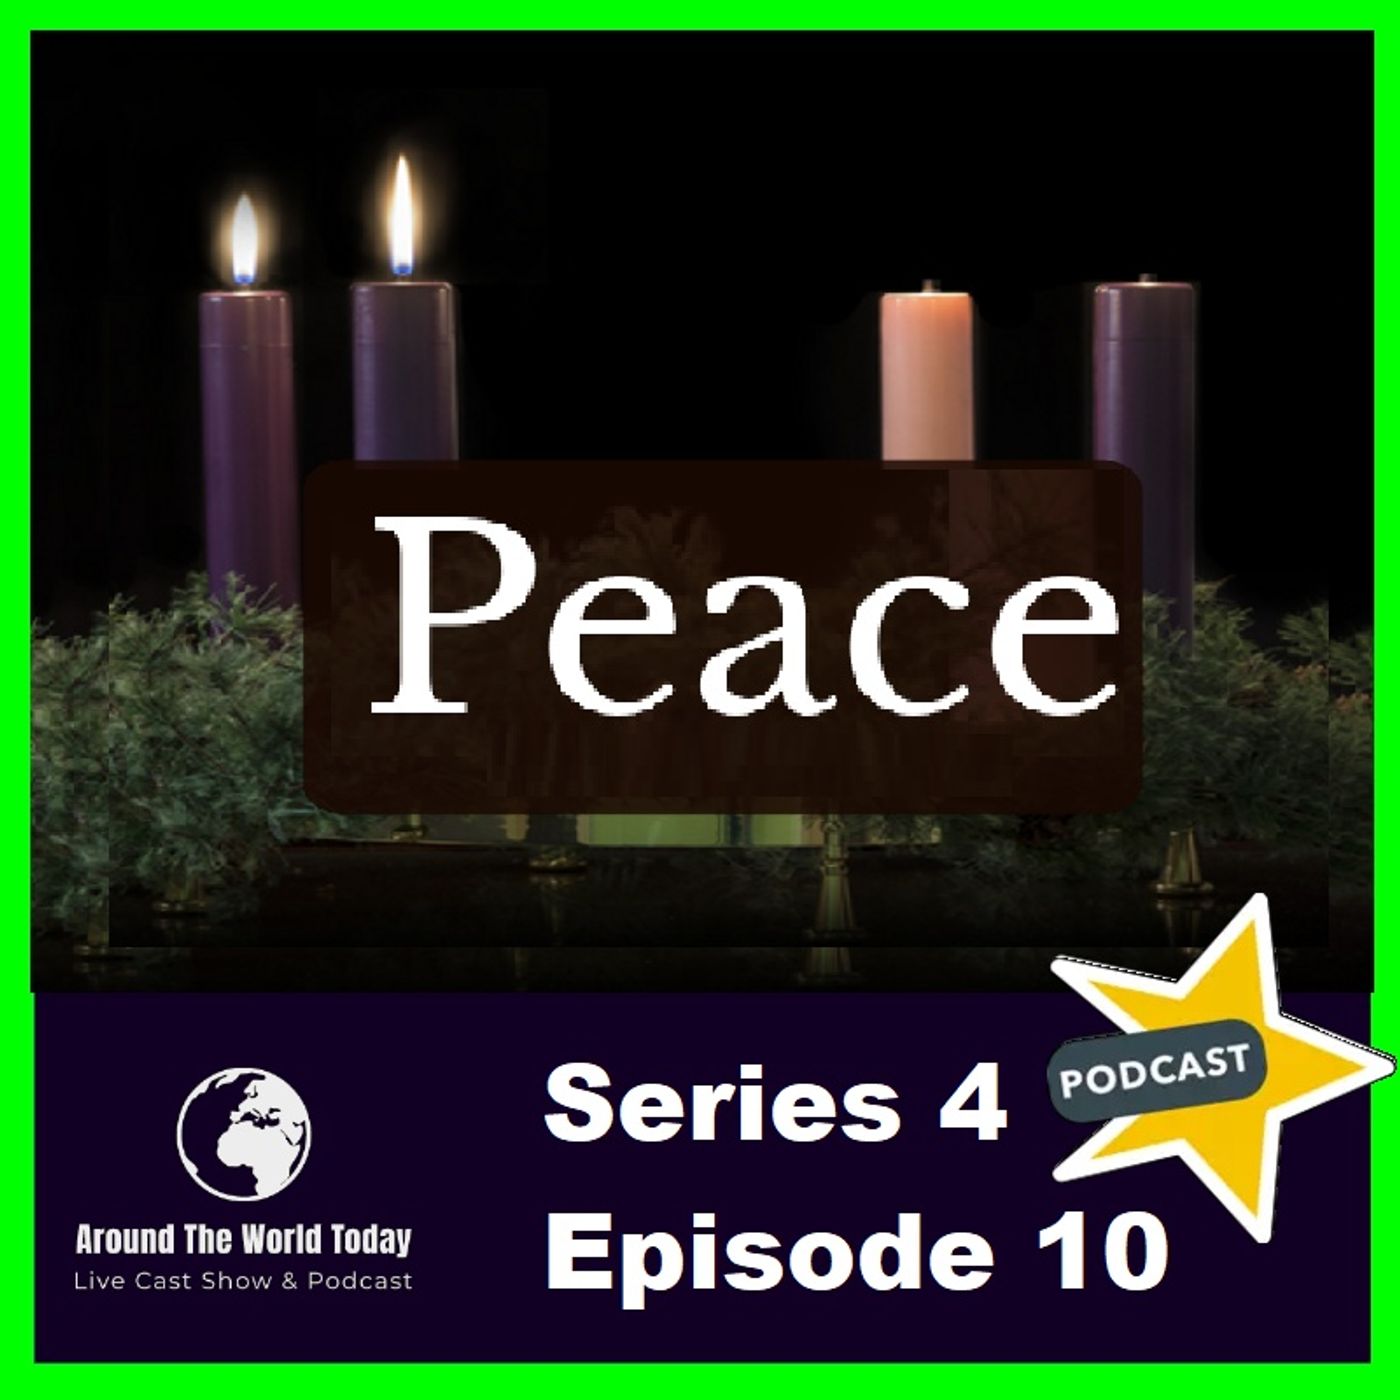 Around the World Today Series 4 Episode 10 - Advent 2 PEACE